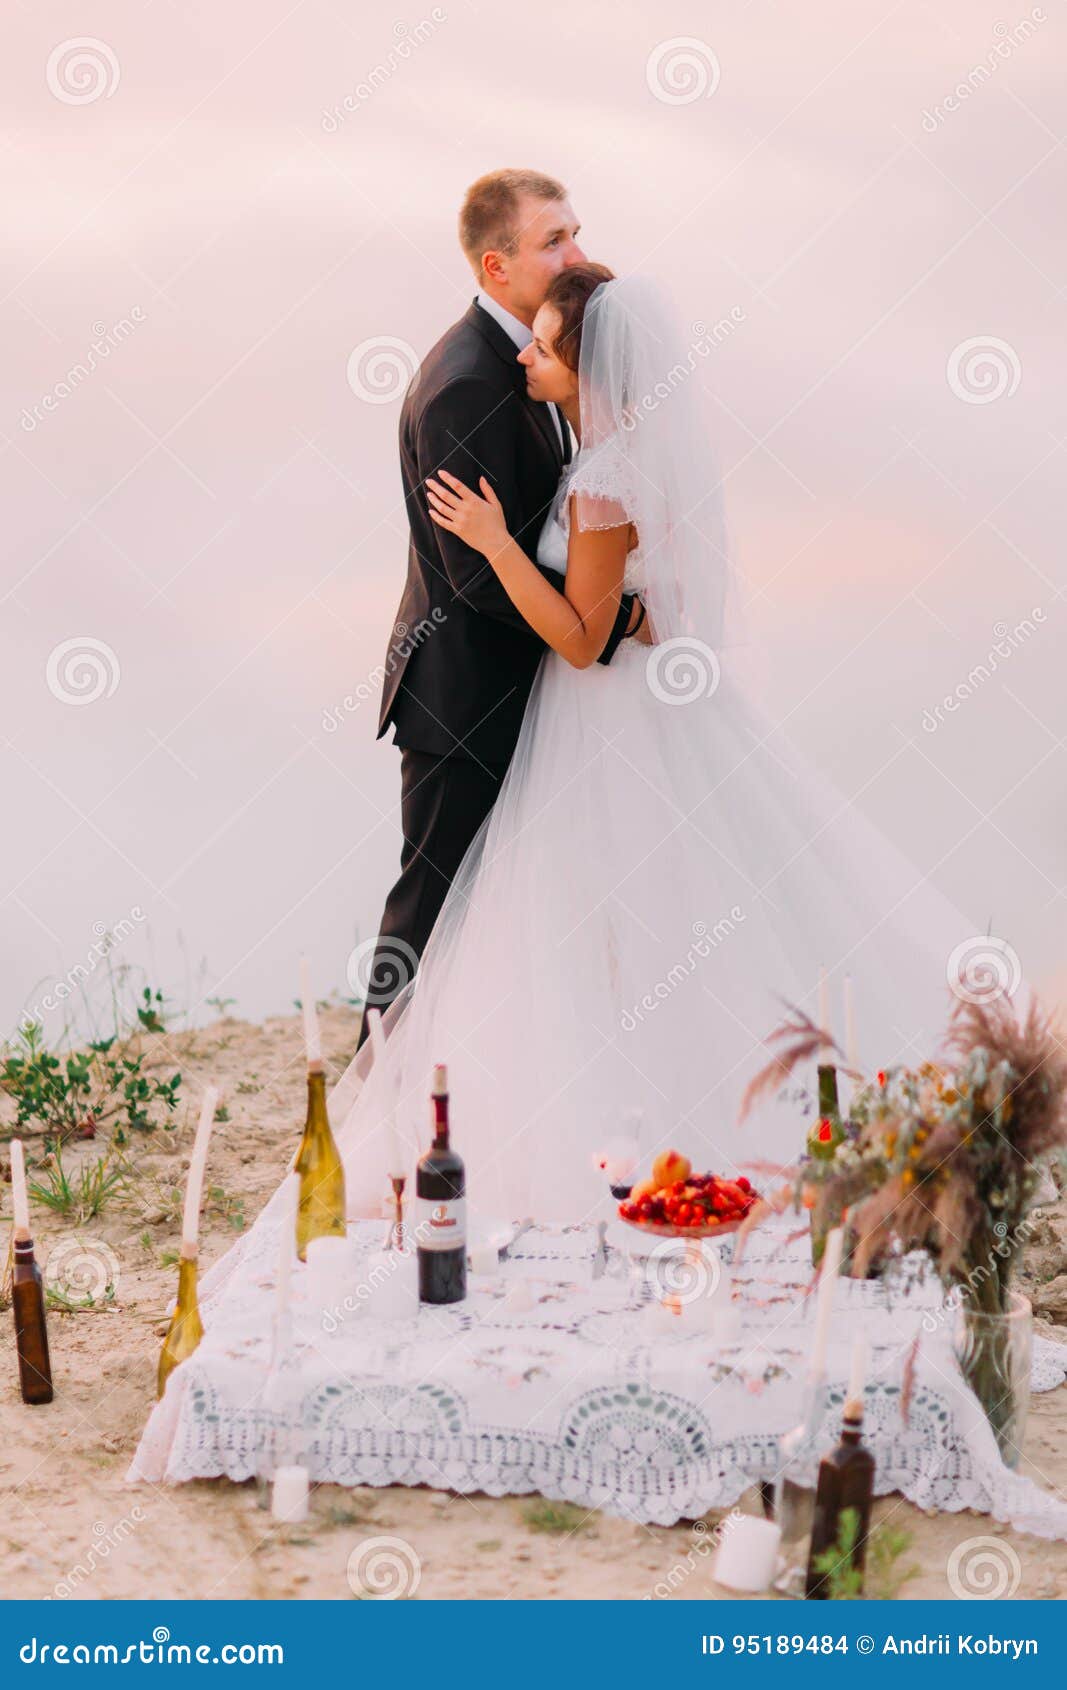 Romantic Full Length View Of The Hugging Newlyweds Behind The Picnic